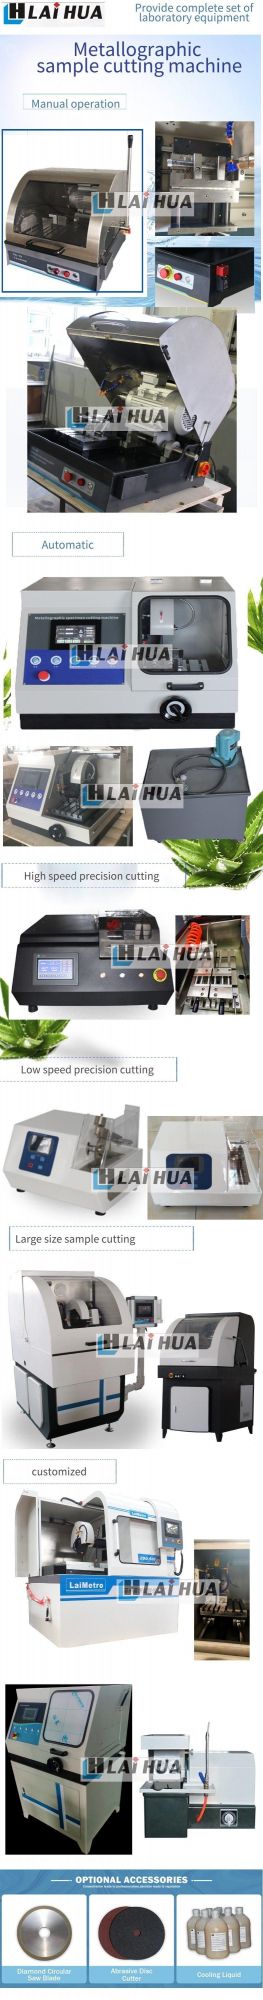 Low-Speed Precision Metallographical Sample Cut -off Machine